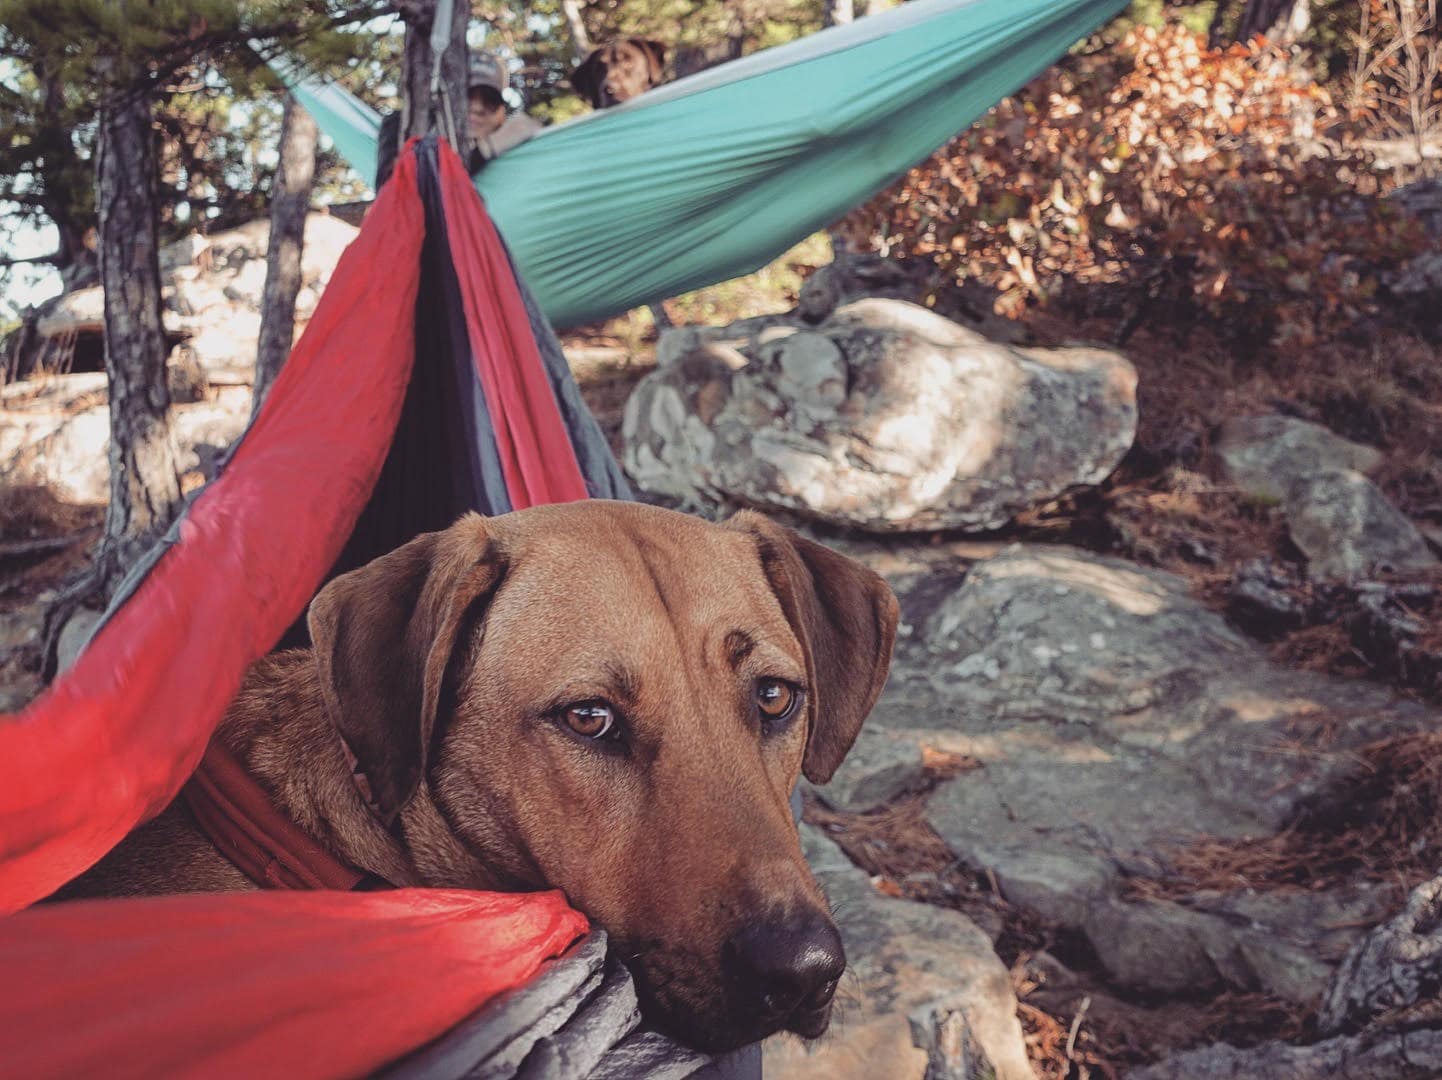 Safety furrst while camping